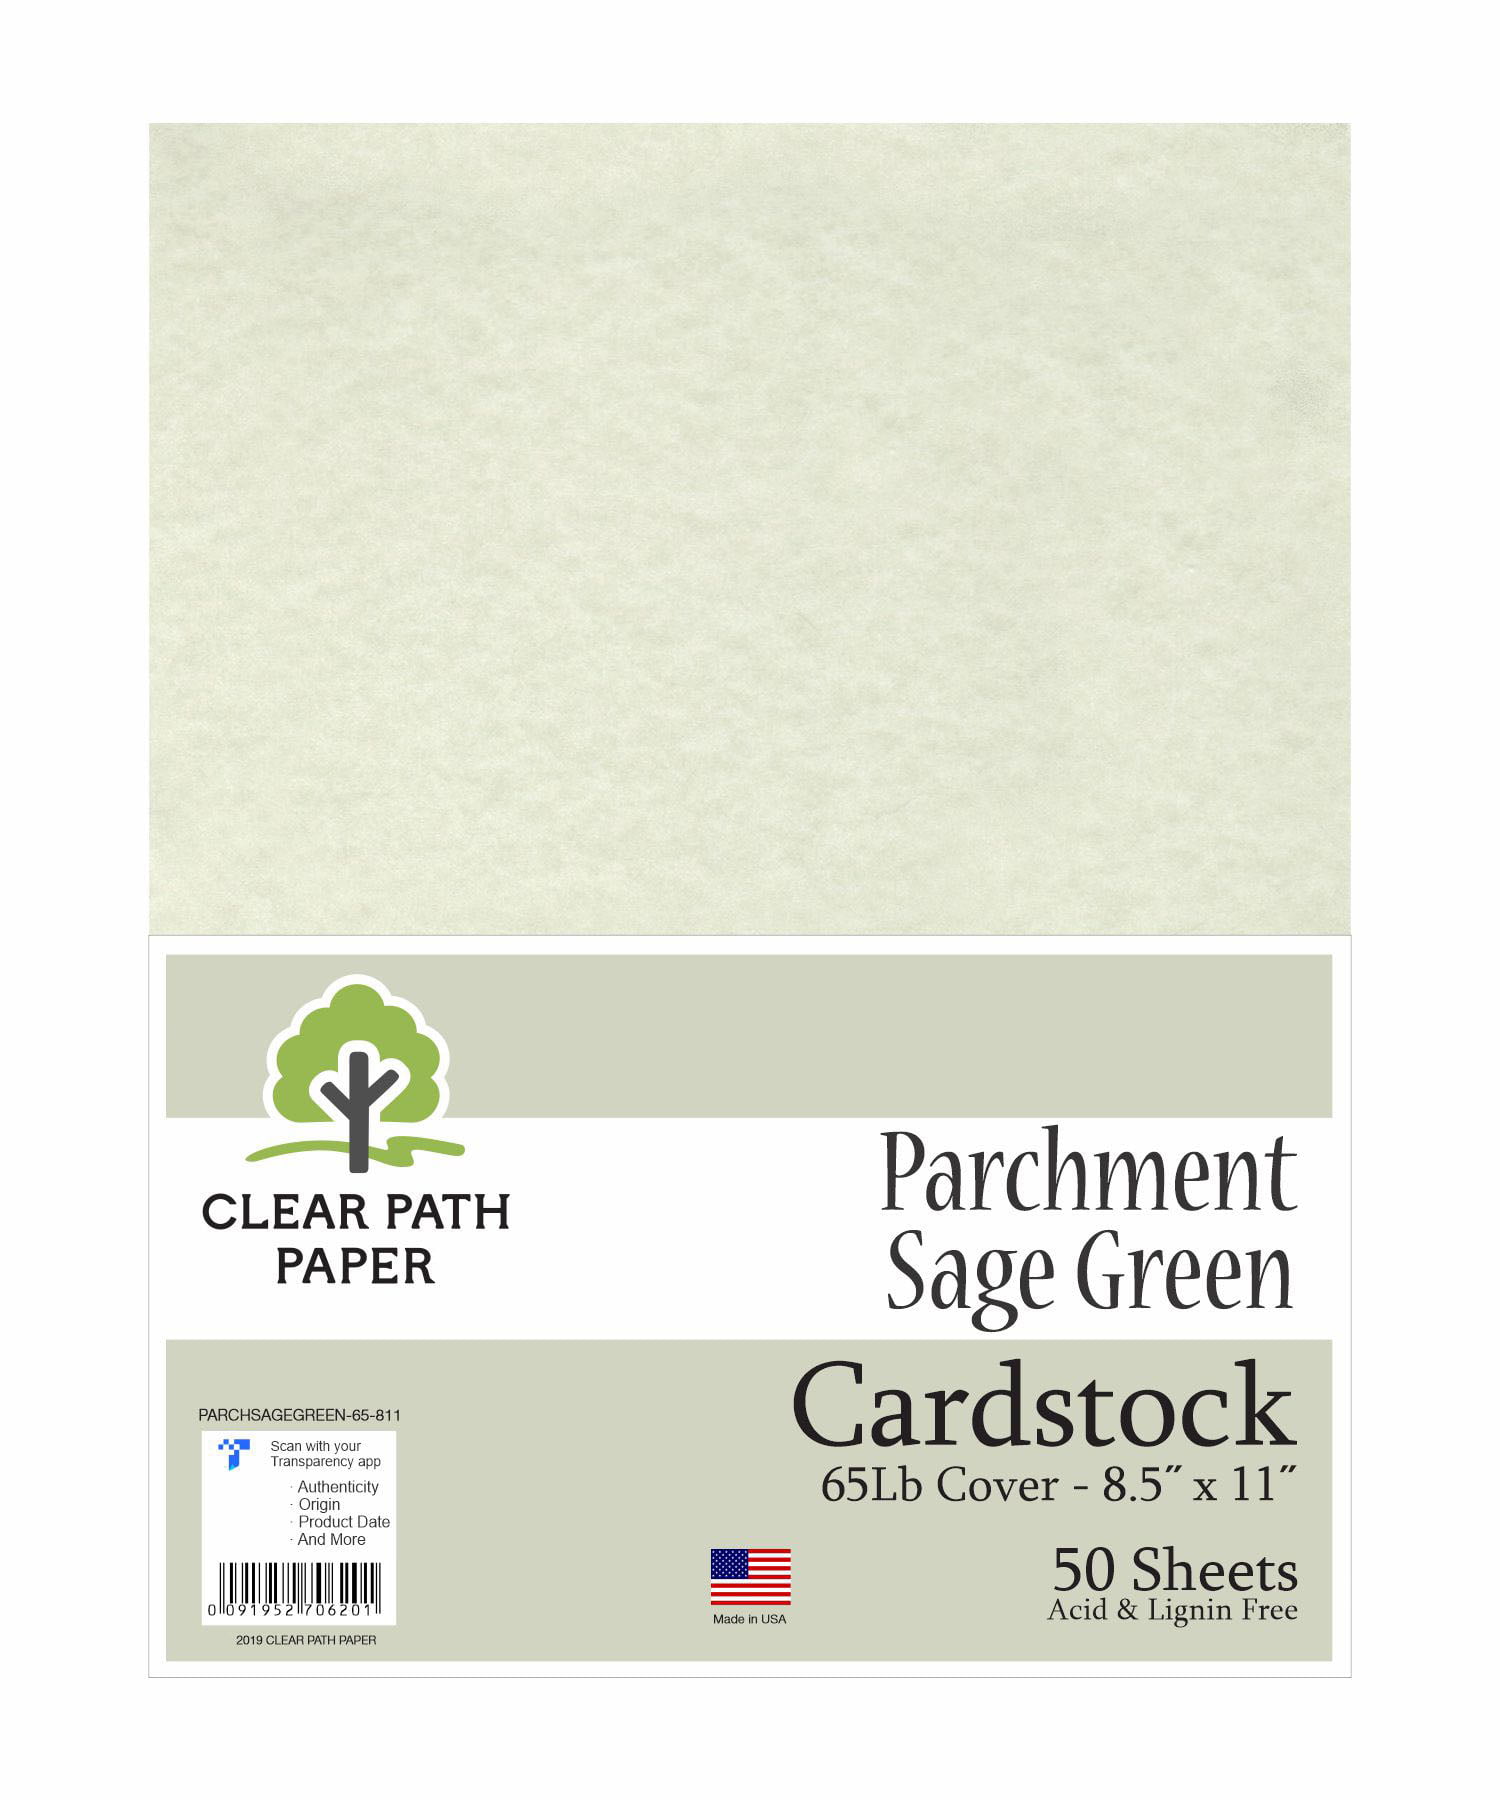 Parchment Paper - Keep Truckee Green